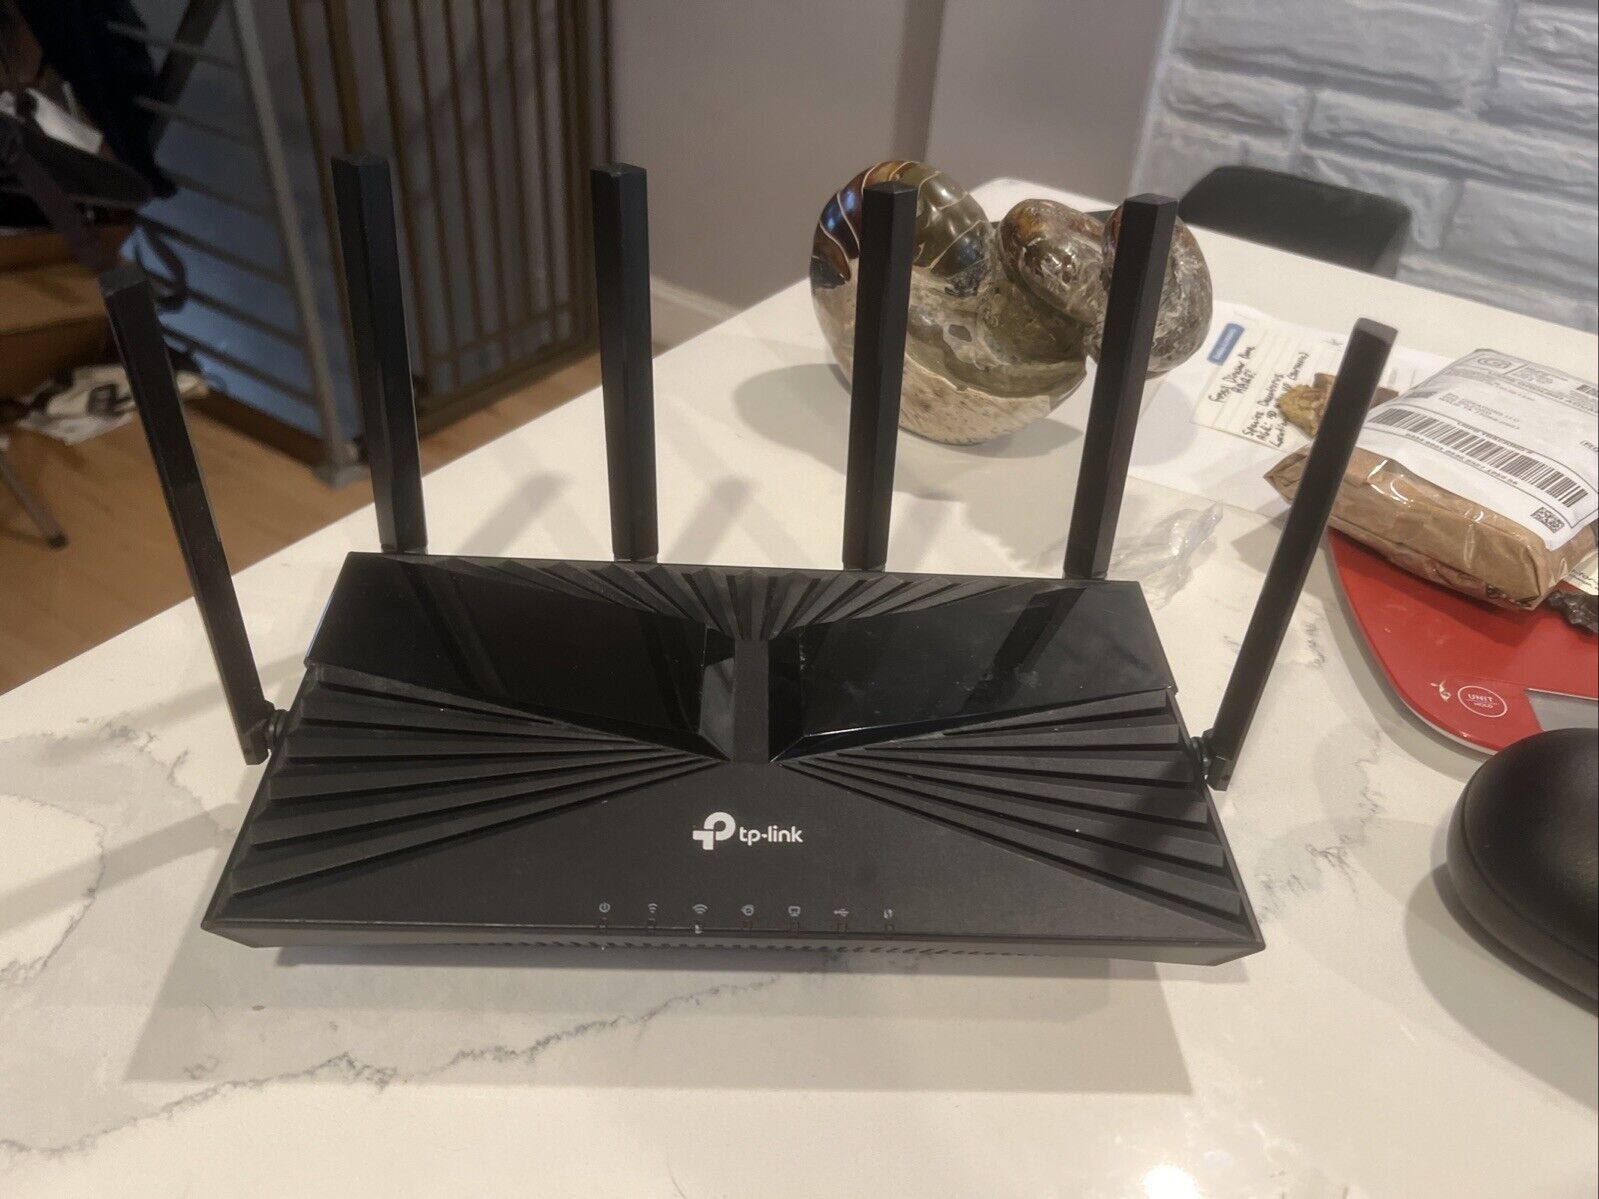 TP-Link 6-Stream Dual-Band WiFi 6 Wi-Fi Router | Archer AX4400 up to 4.4 Gbps